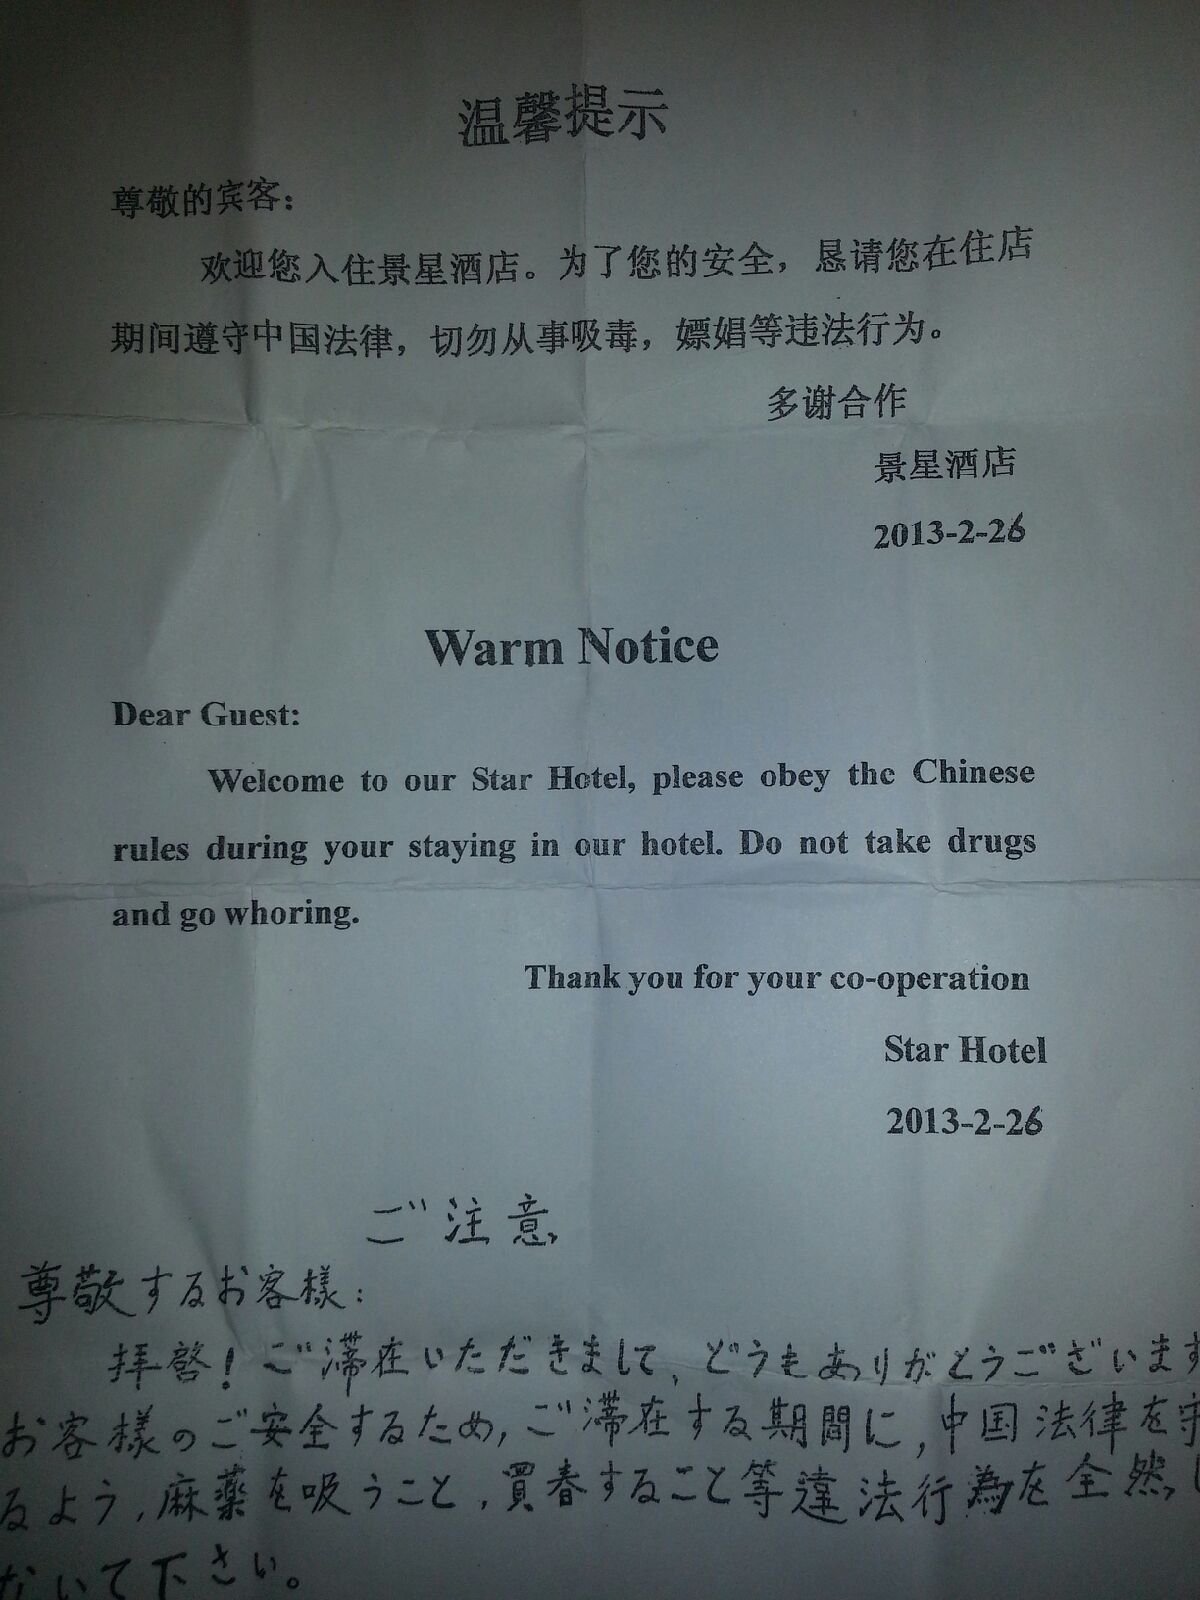 chinese google translate meme - , ,, 2013226 Warm Notice Dear Guest Welcome to our Star Hotel, please obey the Chinese rules during your staying in our hotel. Do not take drugs and go whoring. Thank you for your cooperation Star Hotel 2013226 ,